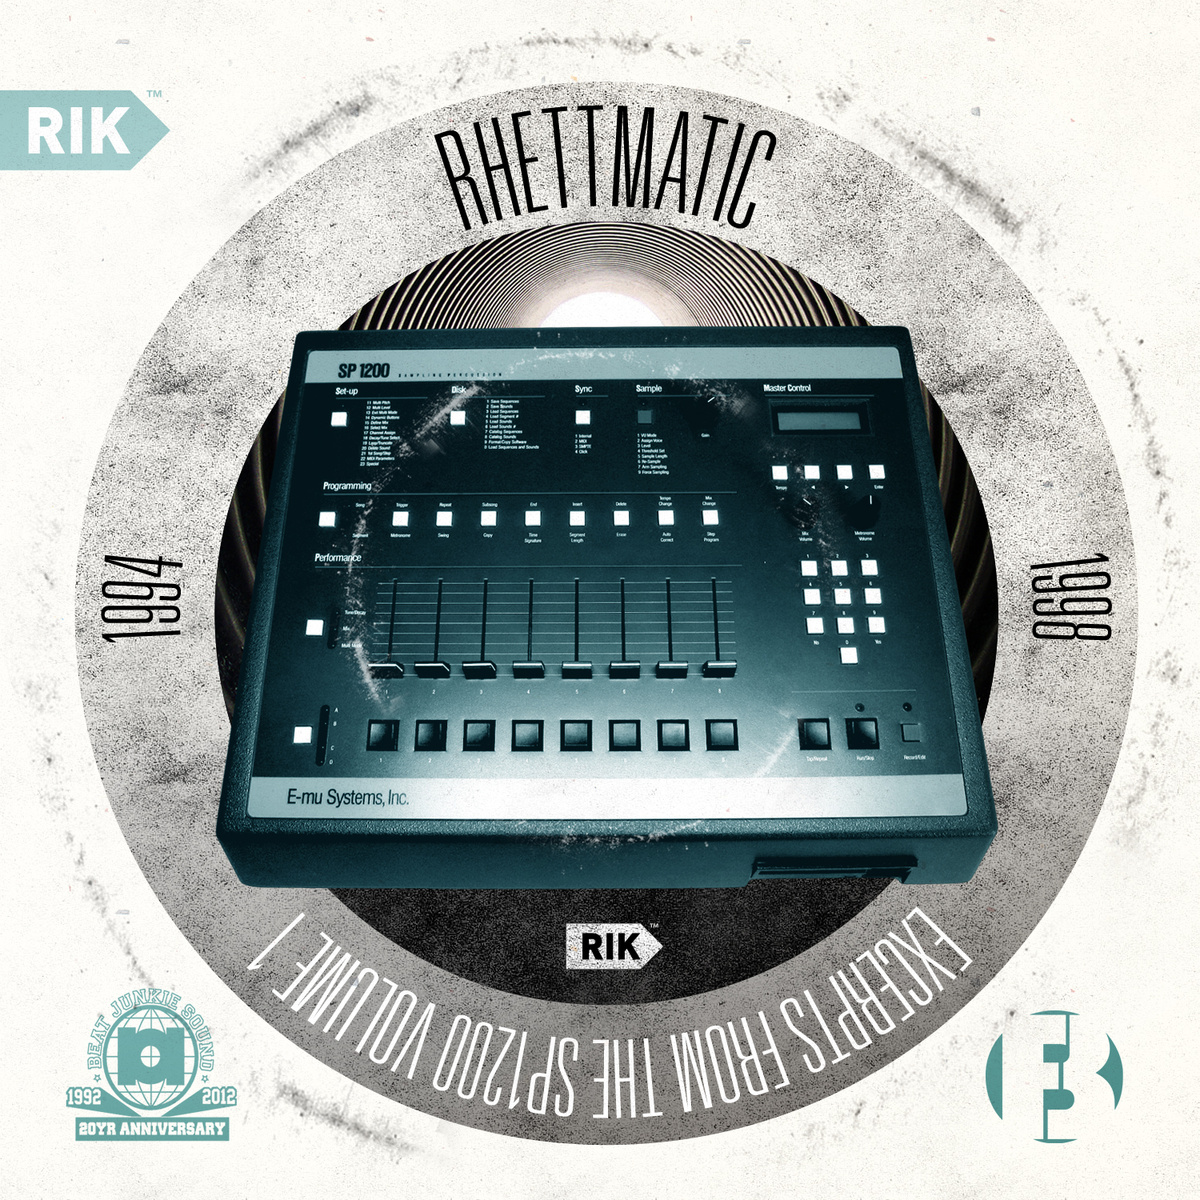 Rhettmatic — Excerpts From The SP 1200: Volume 1 (1994-1998)